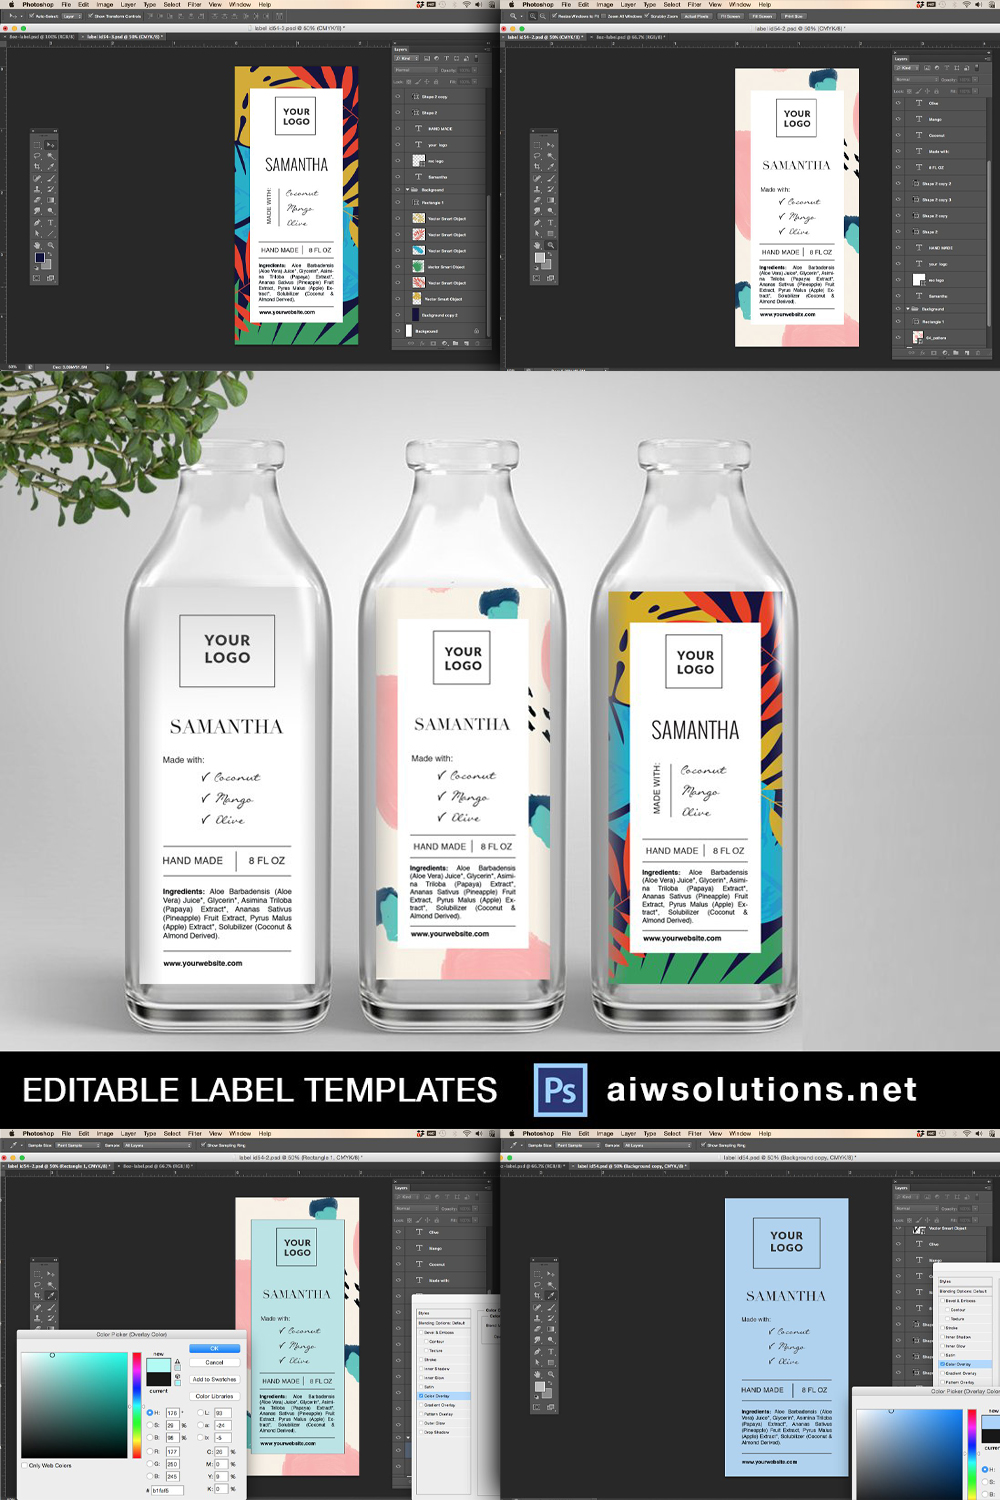 Packaging and label template of pinterest.